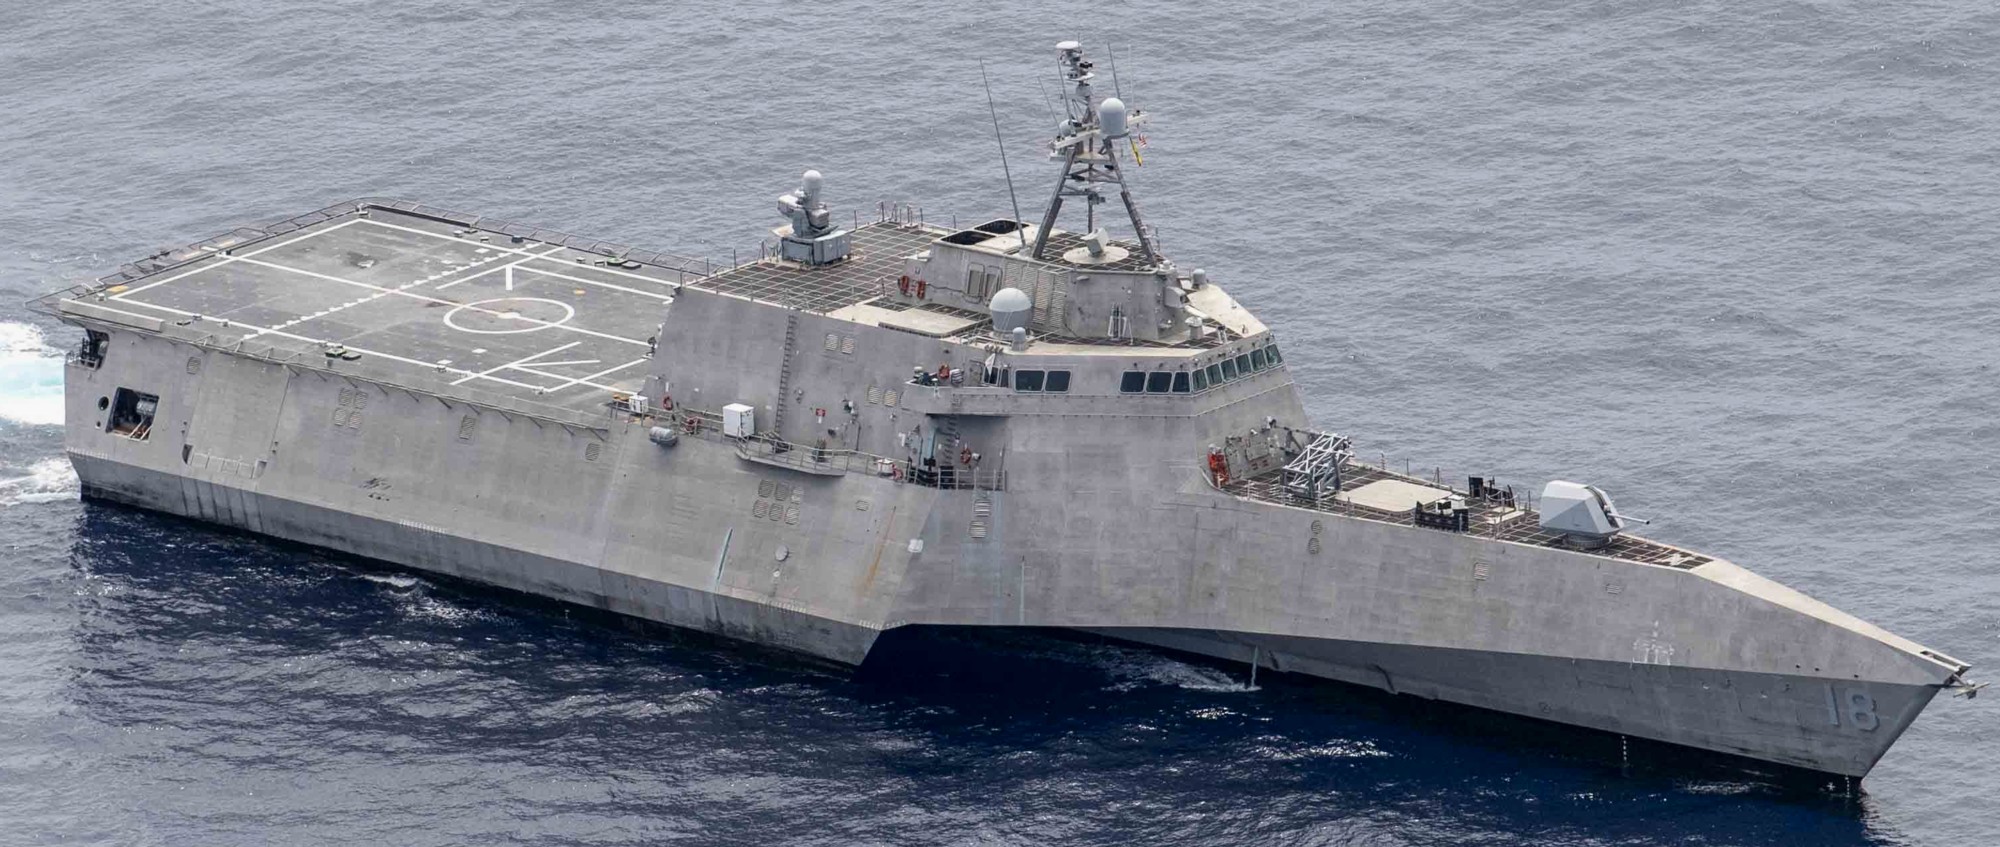 lcs-18 uss charleston independence class littoral combat ship us navy 24